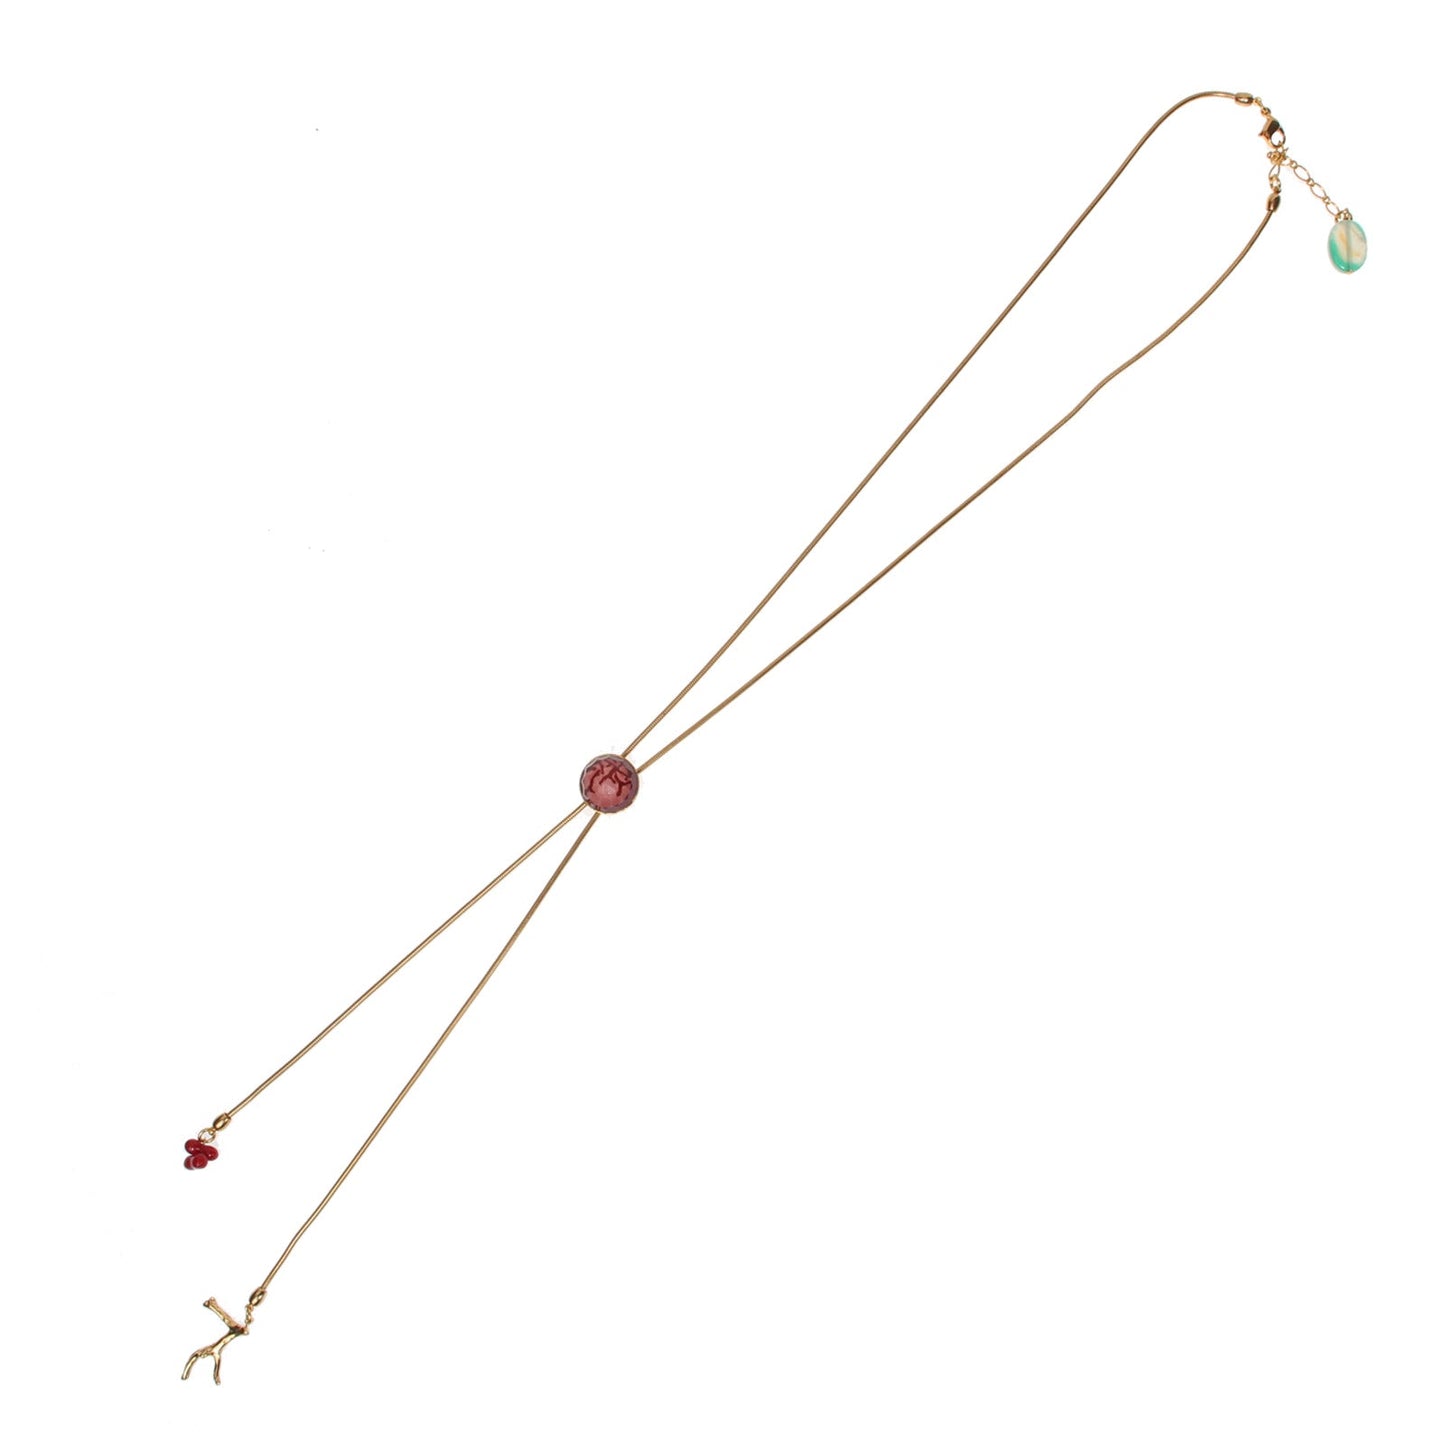 Cain Bolo Tie Necklace Pink Gold TAMARUSAN